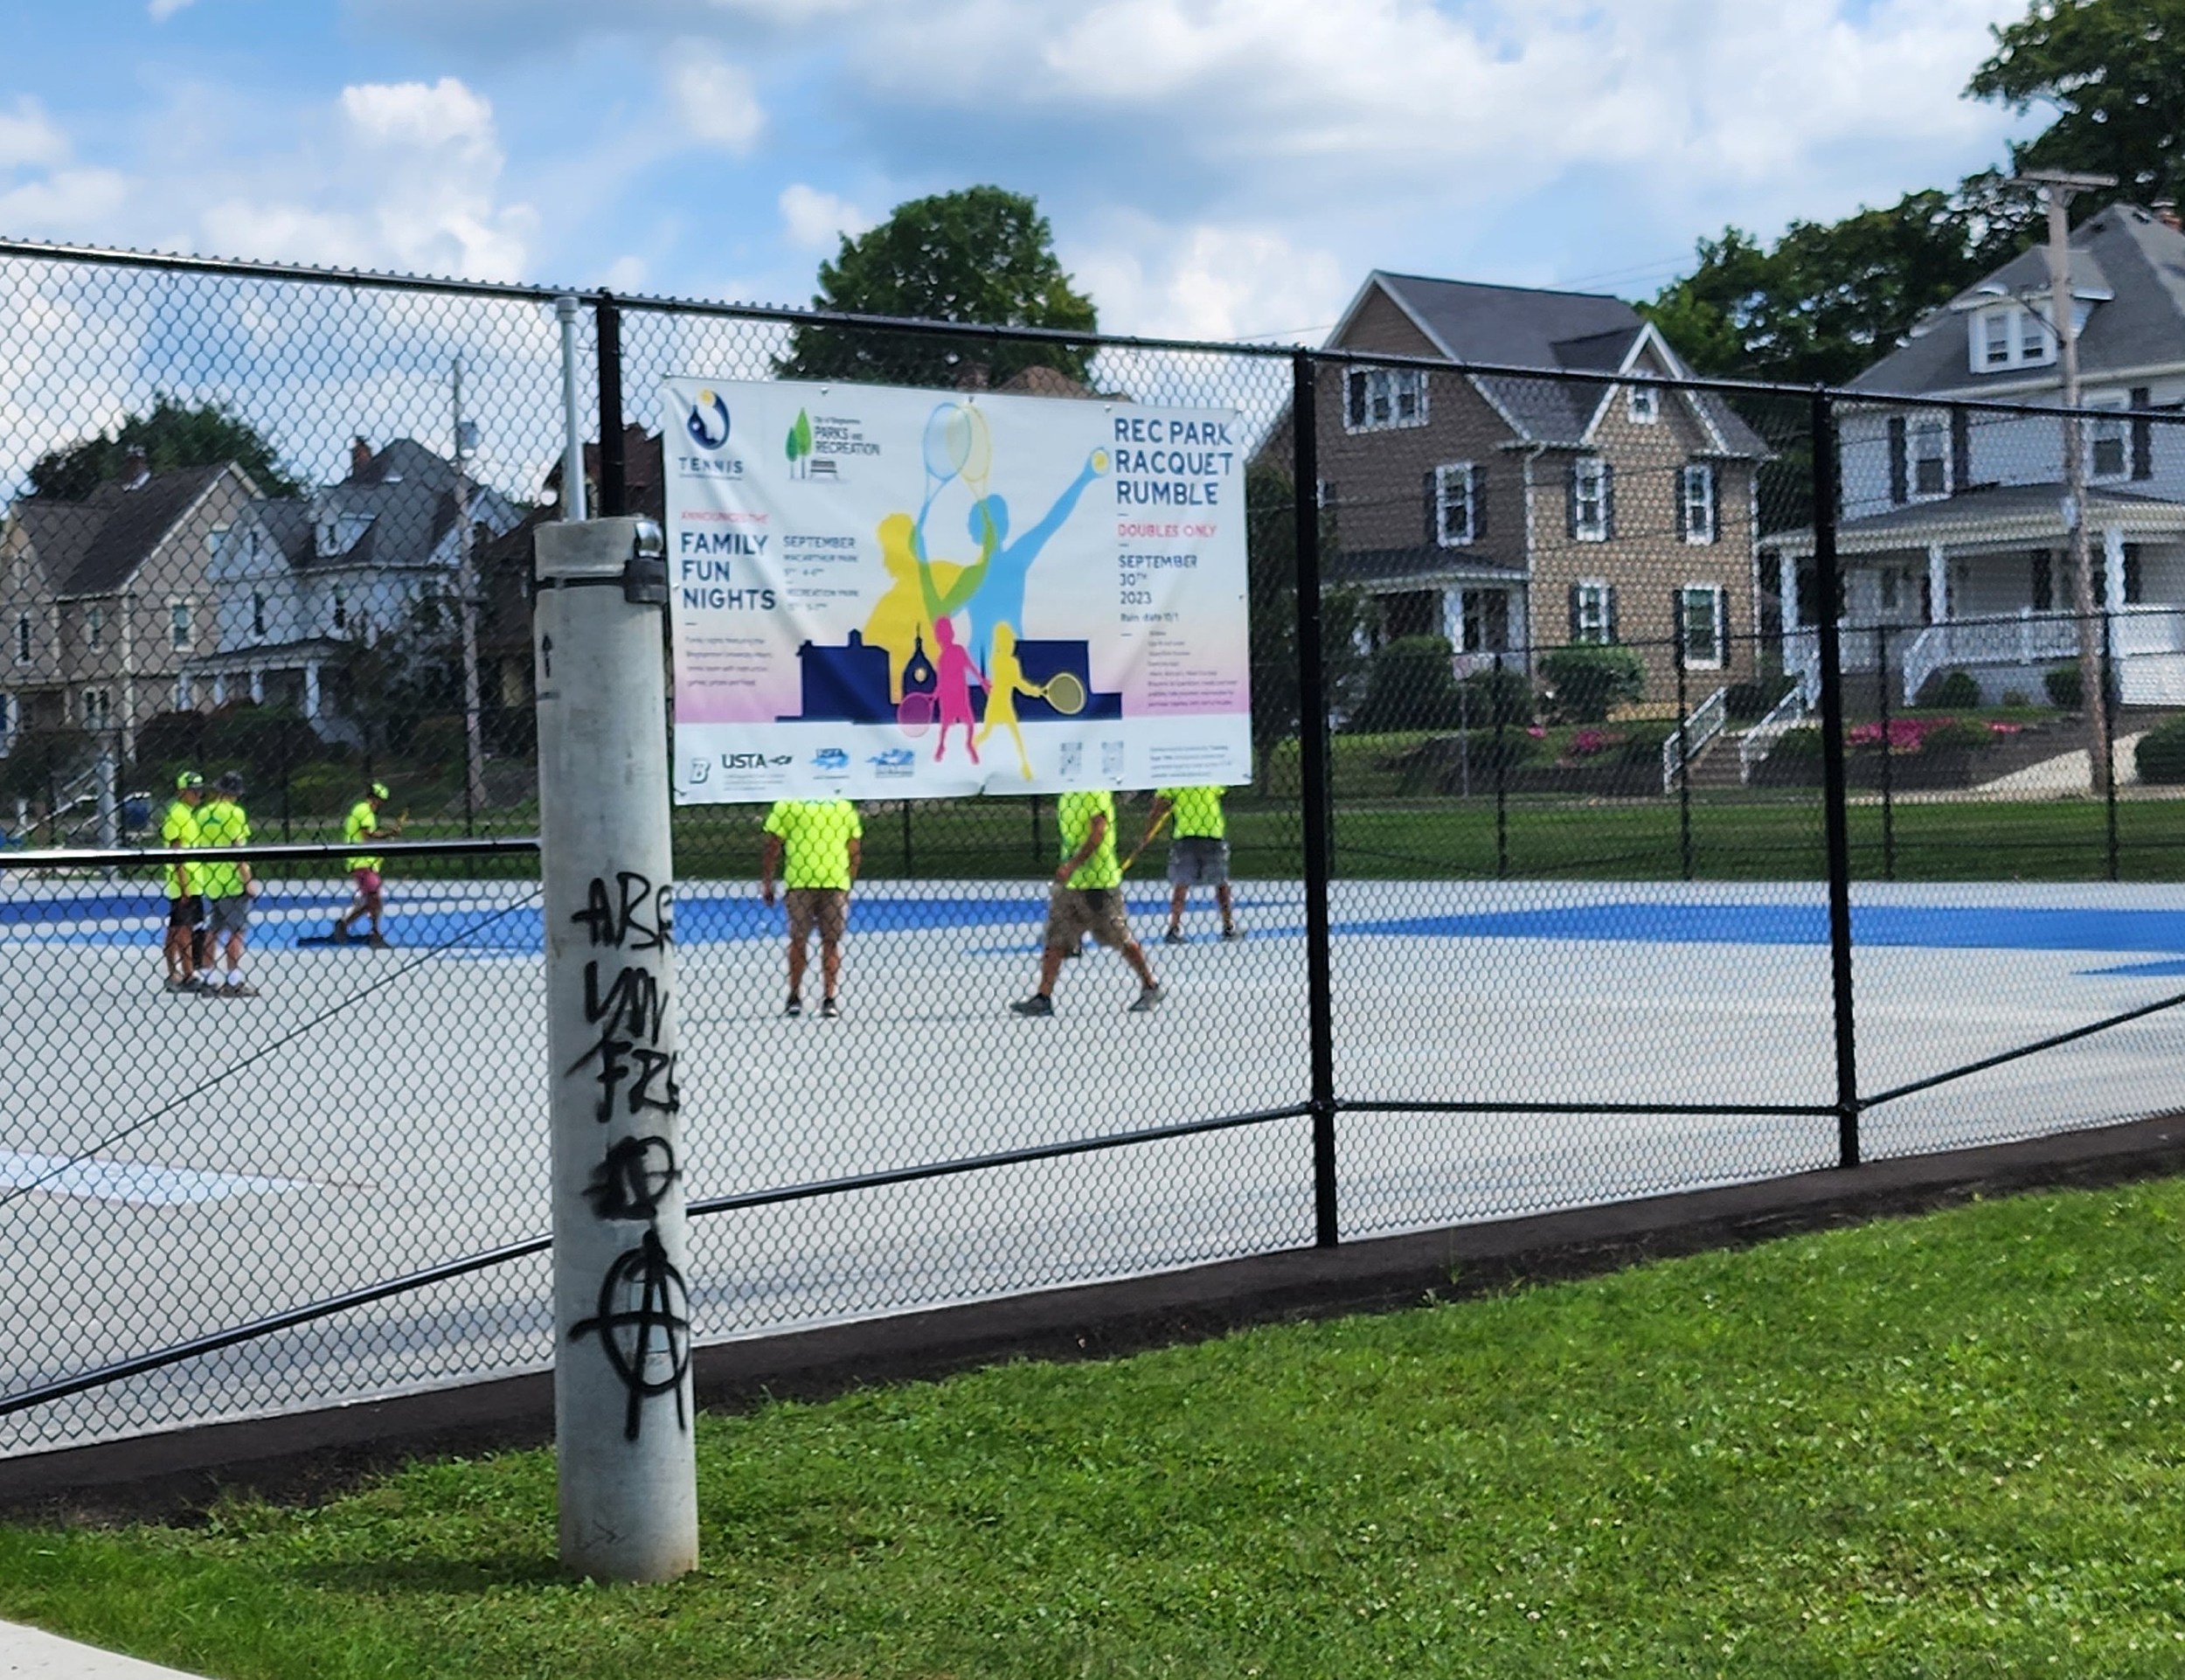 Rec Park Tennis Courts May Finally Open for Play This Month picture